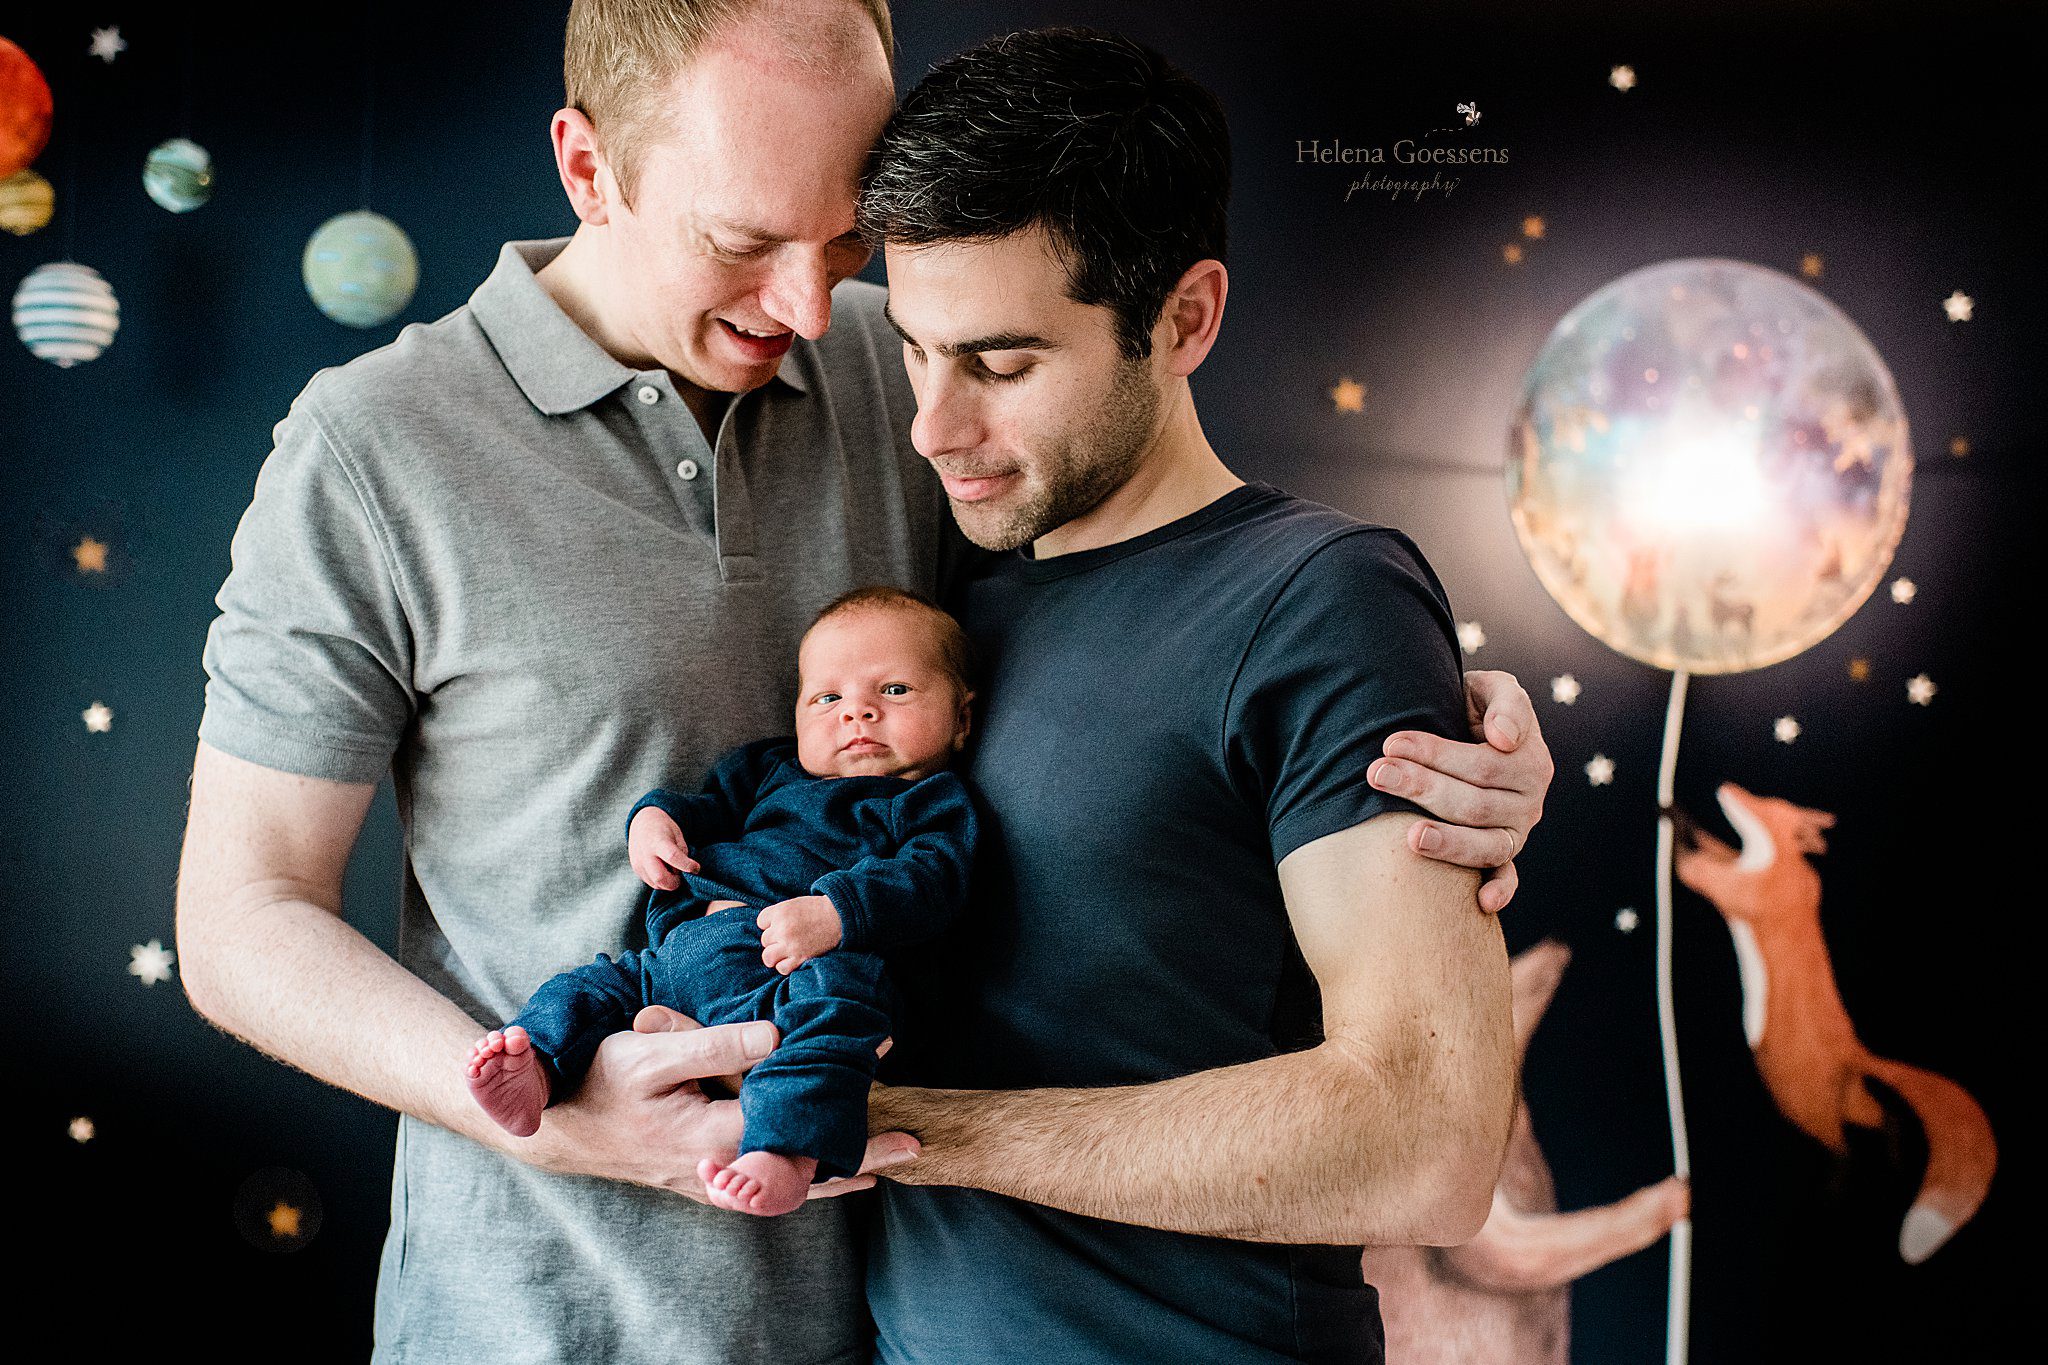 Helena Goessens Photography captures two dads holding newborn baby boy